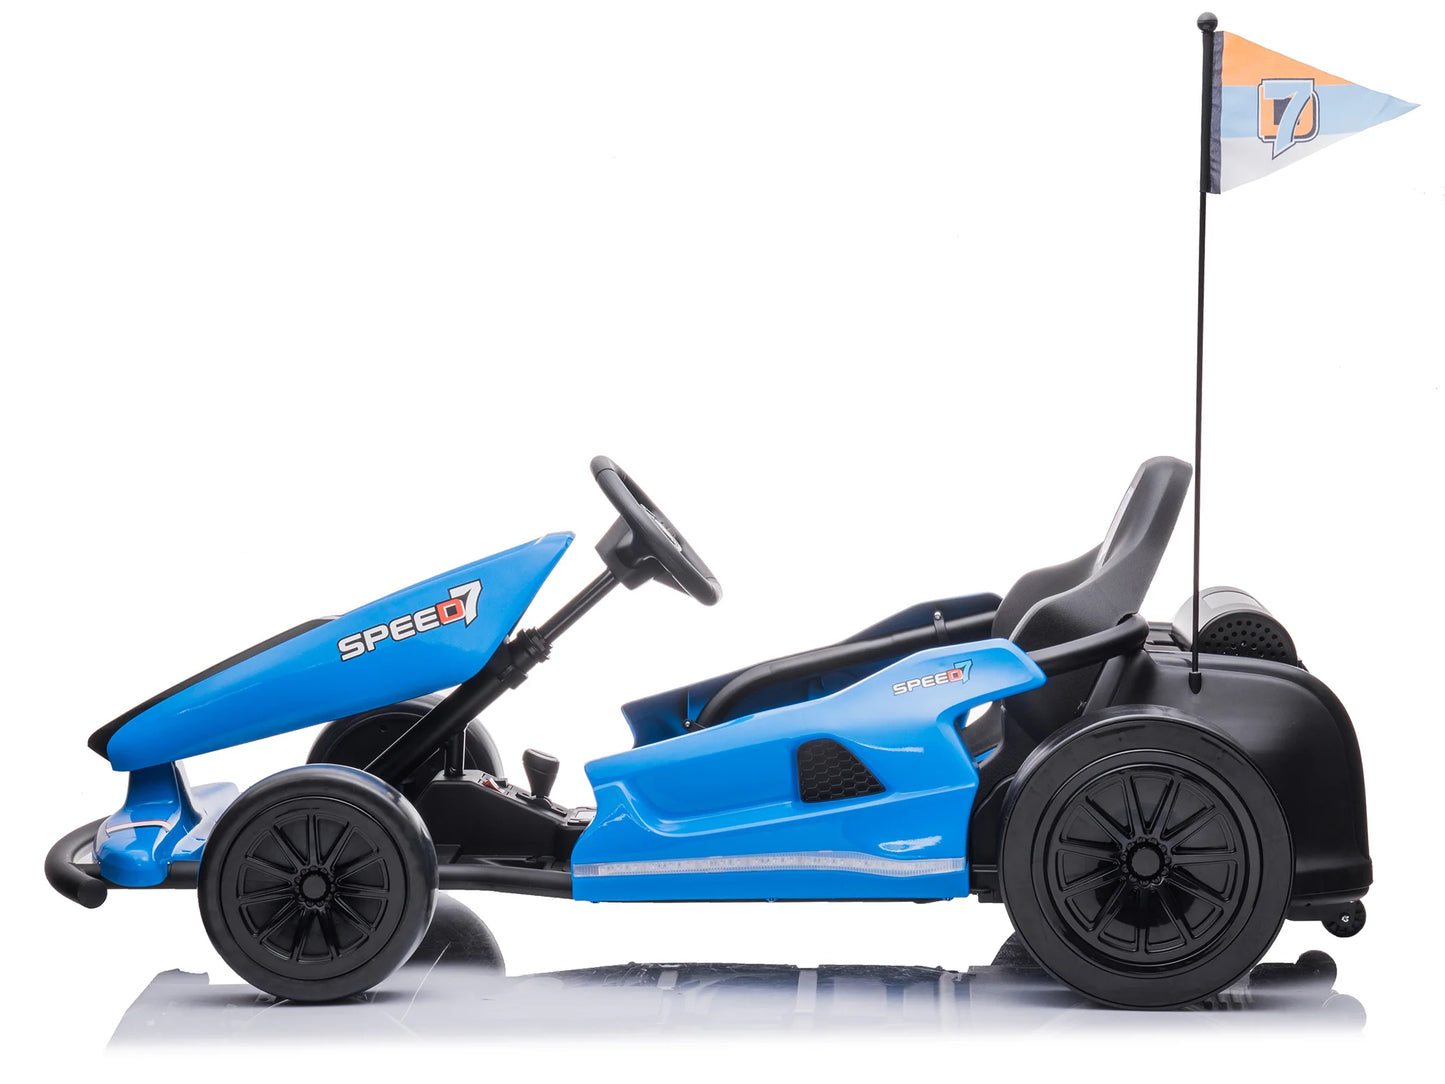 Kids 3.0 Electric 24V Go-Kart with DRIFT Function in Blue